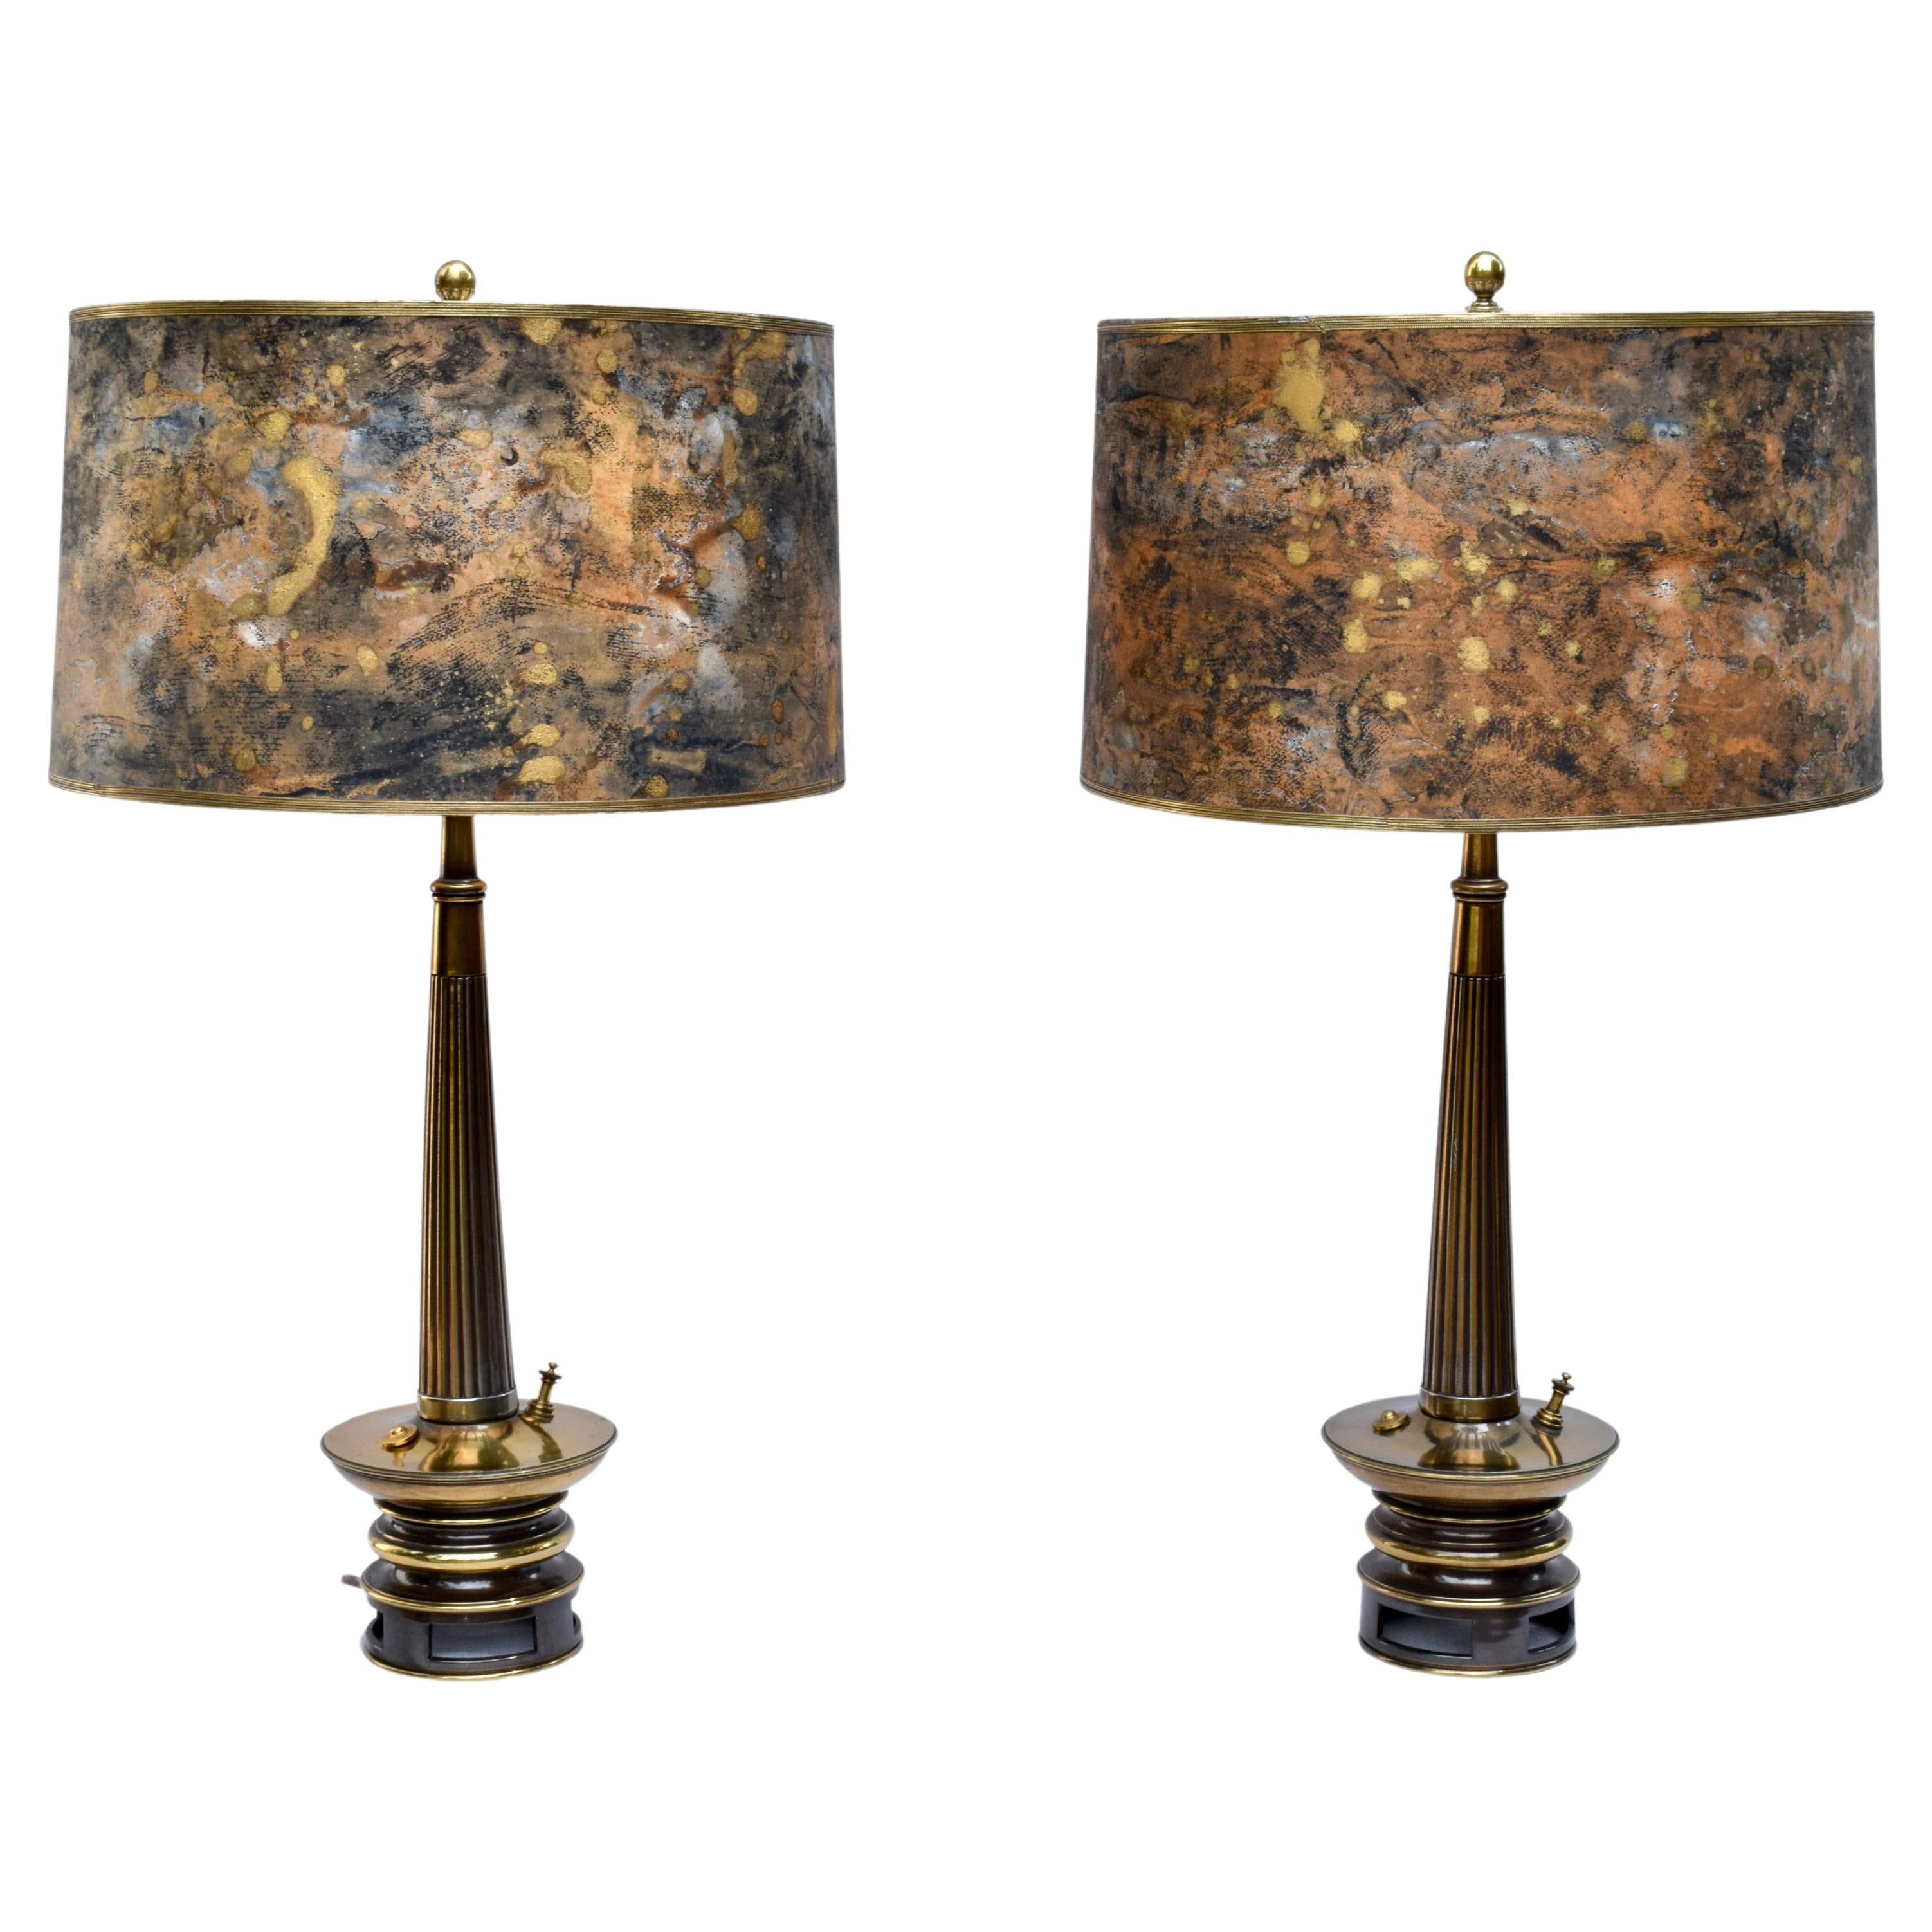 Mid Century Modern Stiffel Table Lamps with Tortoise Shades